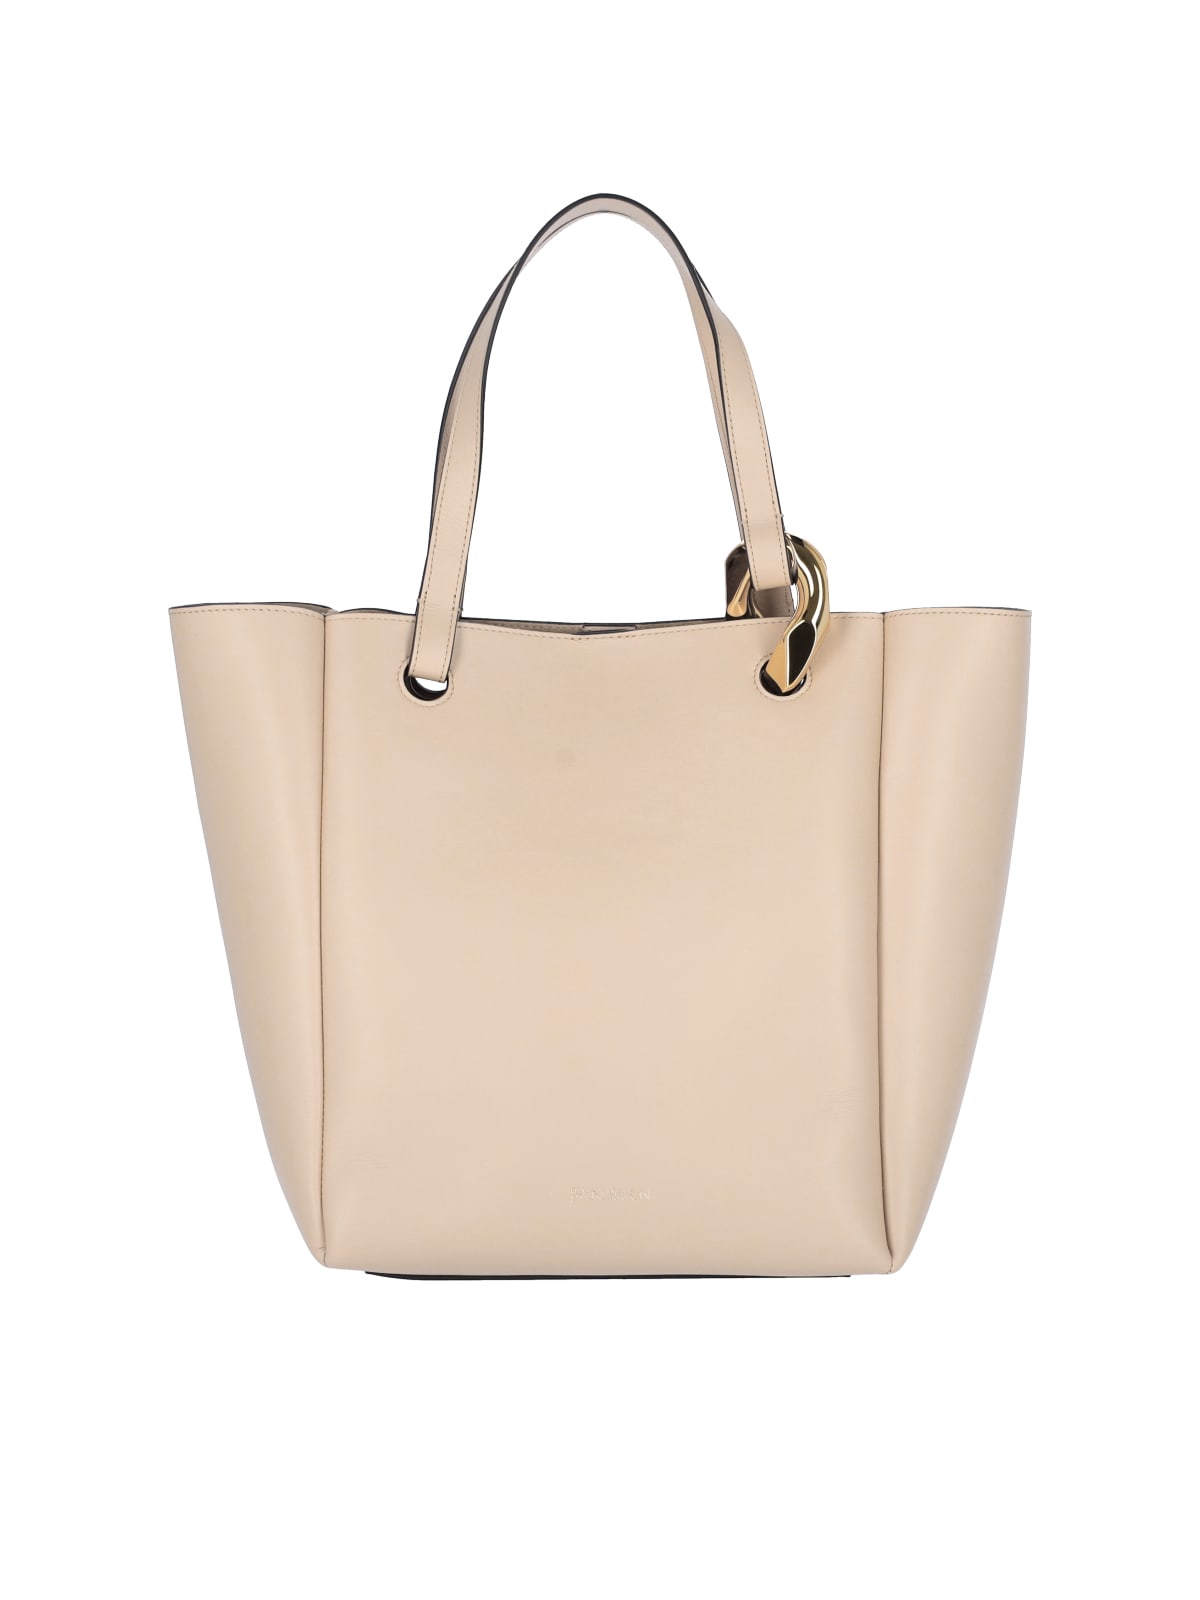 J.W. Anderson chain Cabas Tote Bag